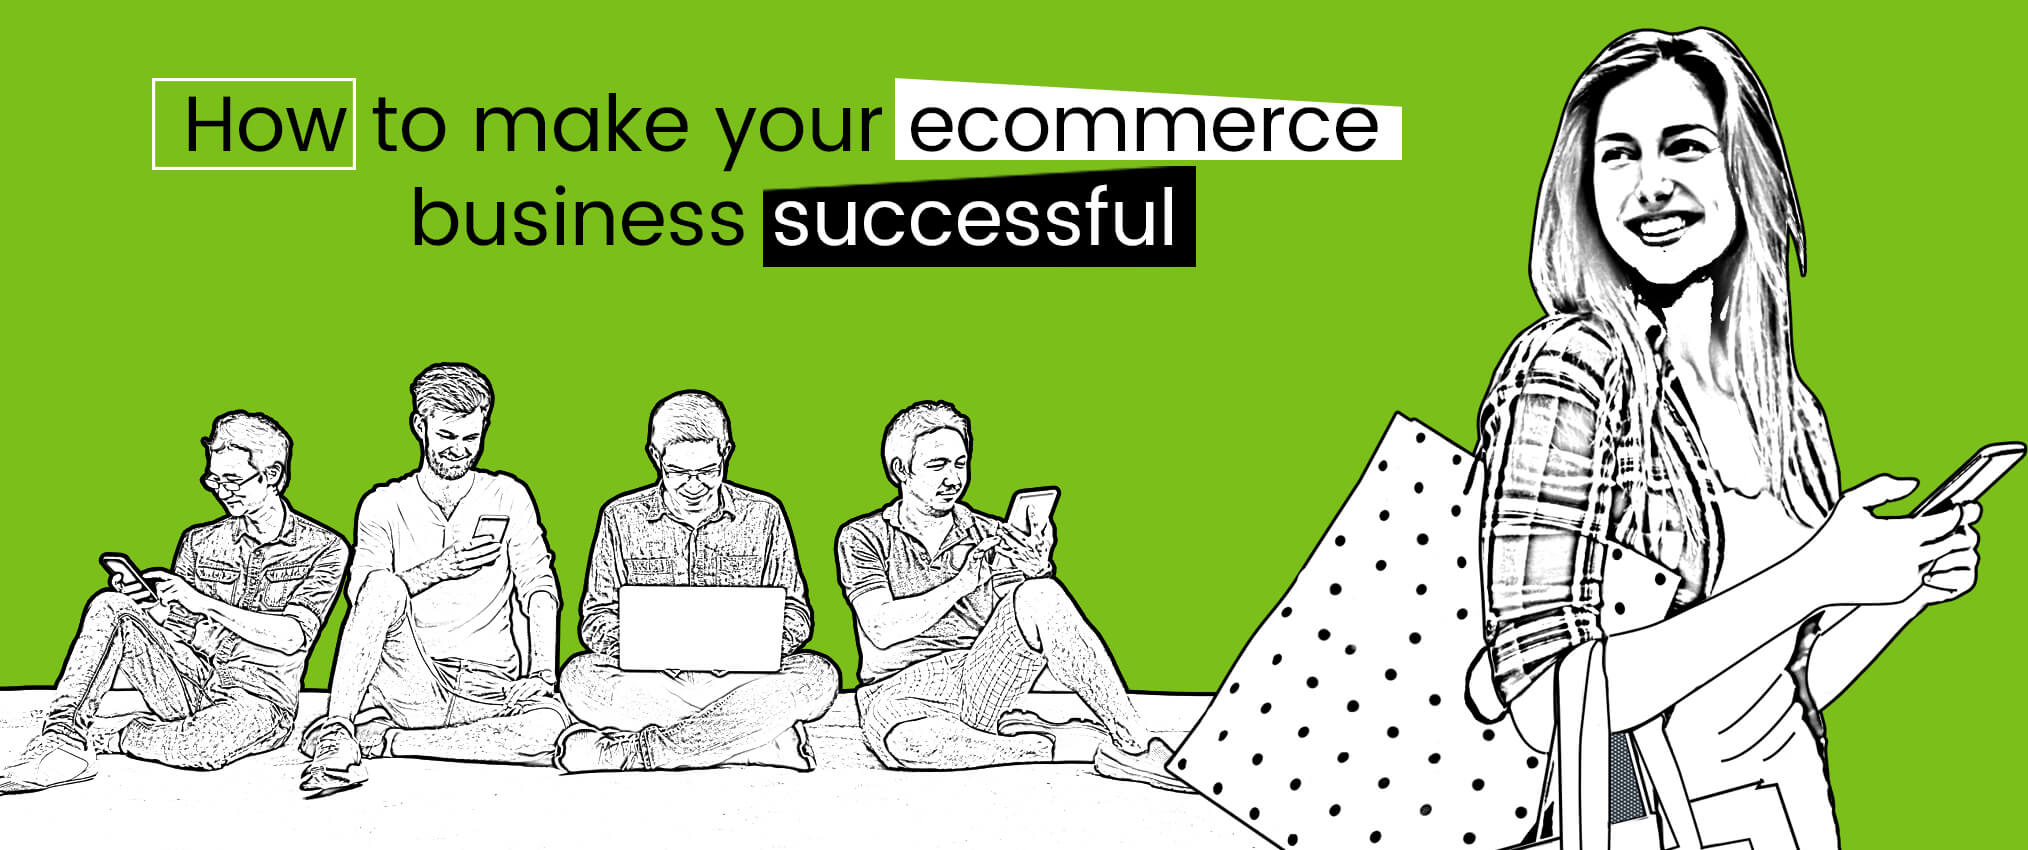 How to make your ecommerce business successful